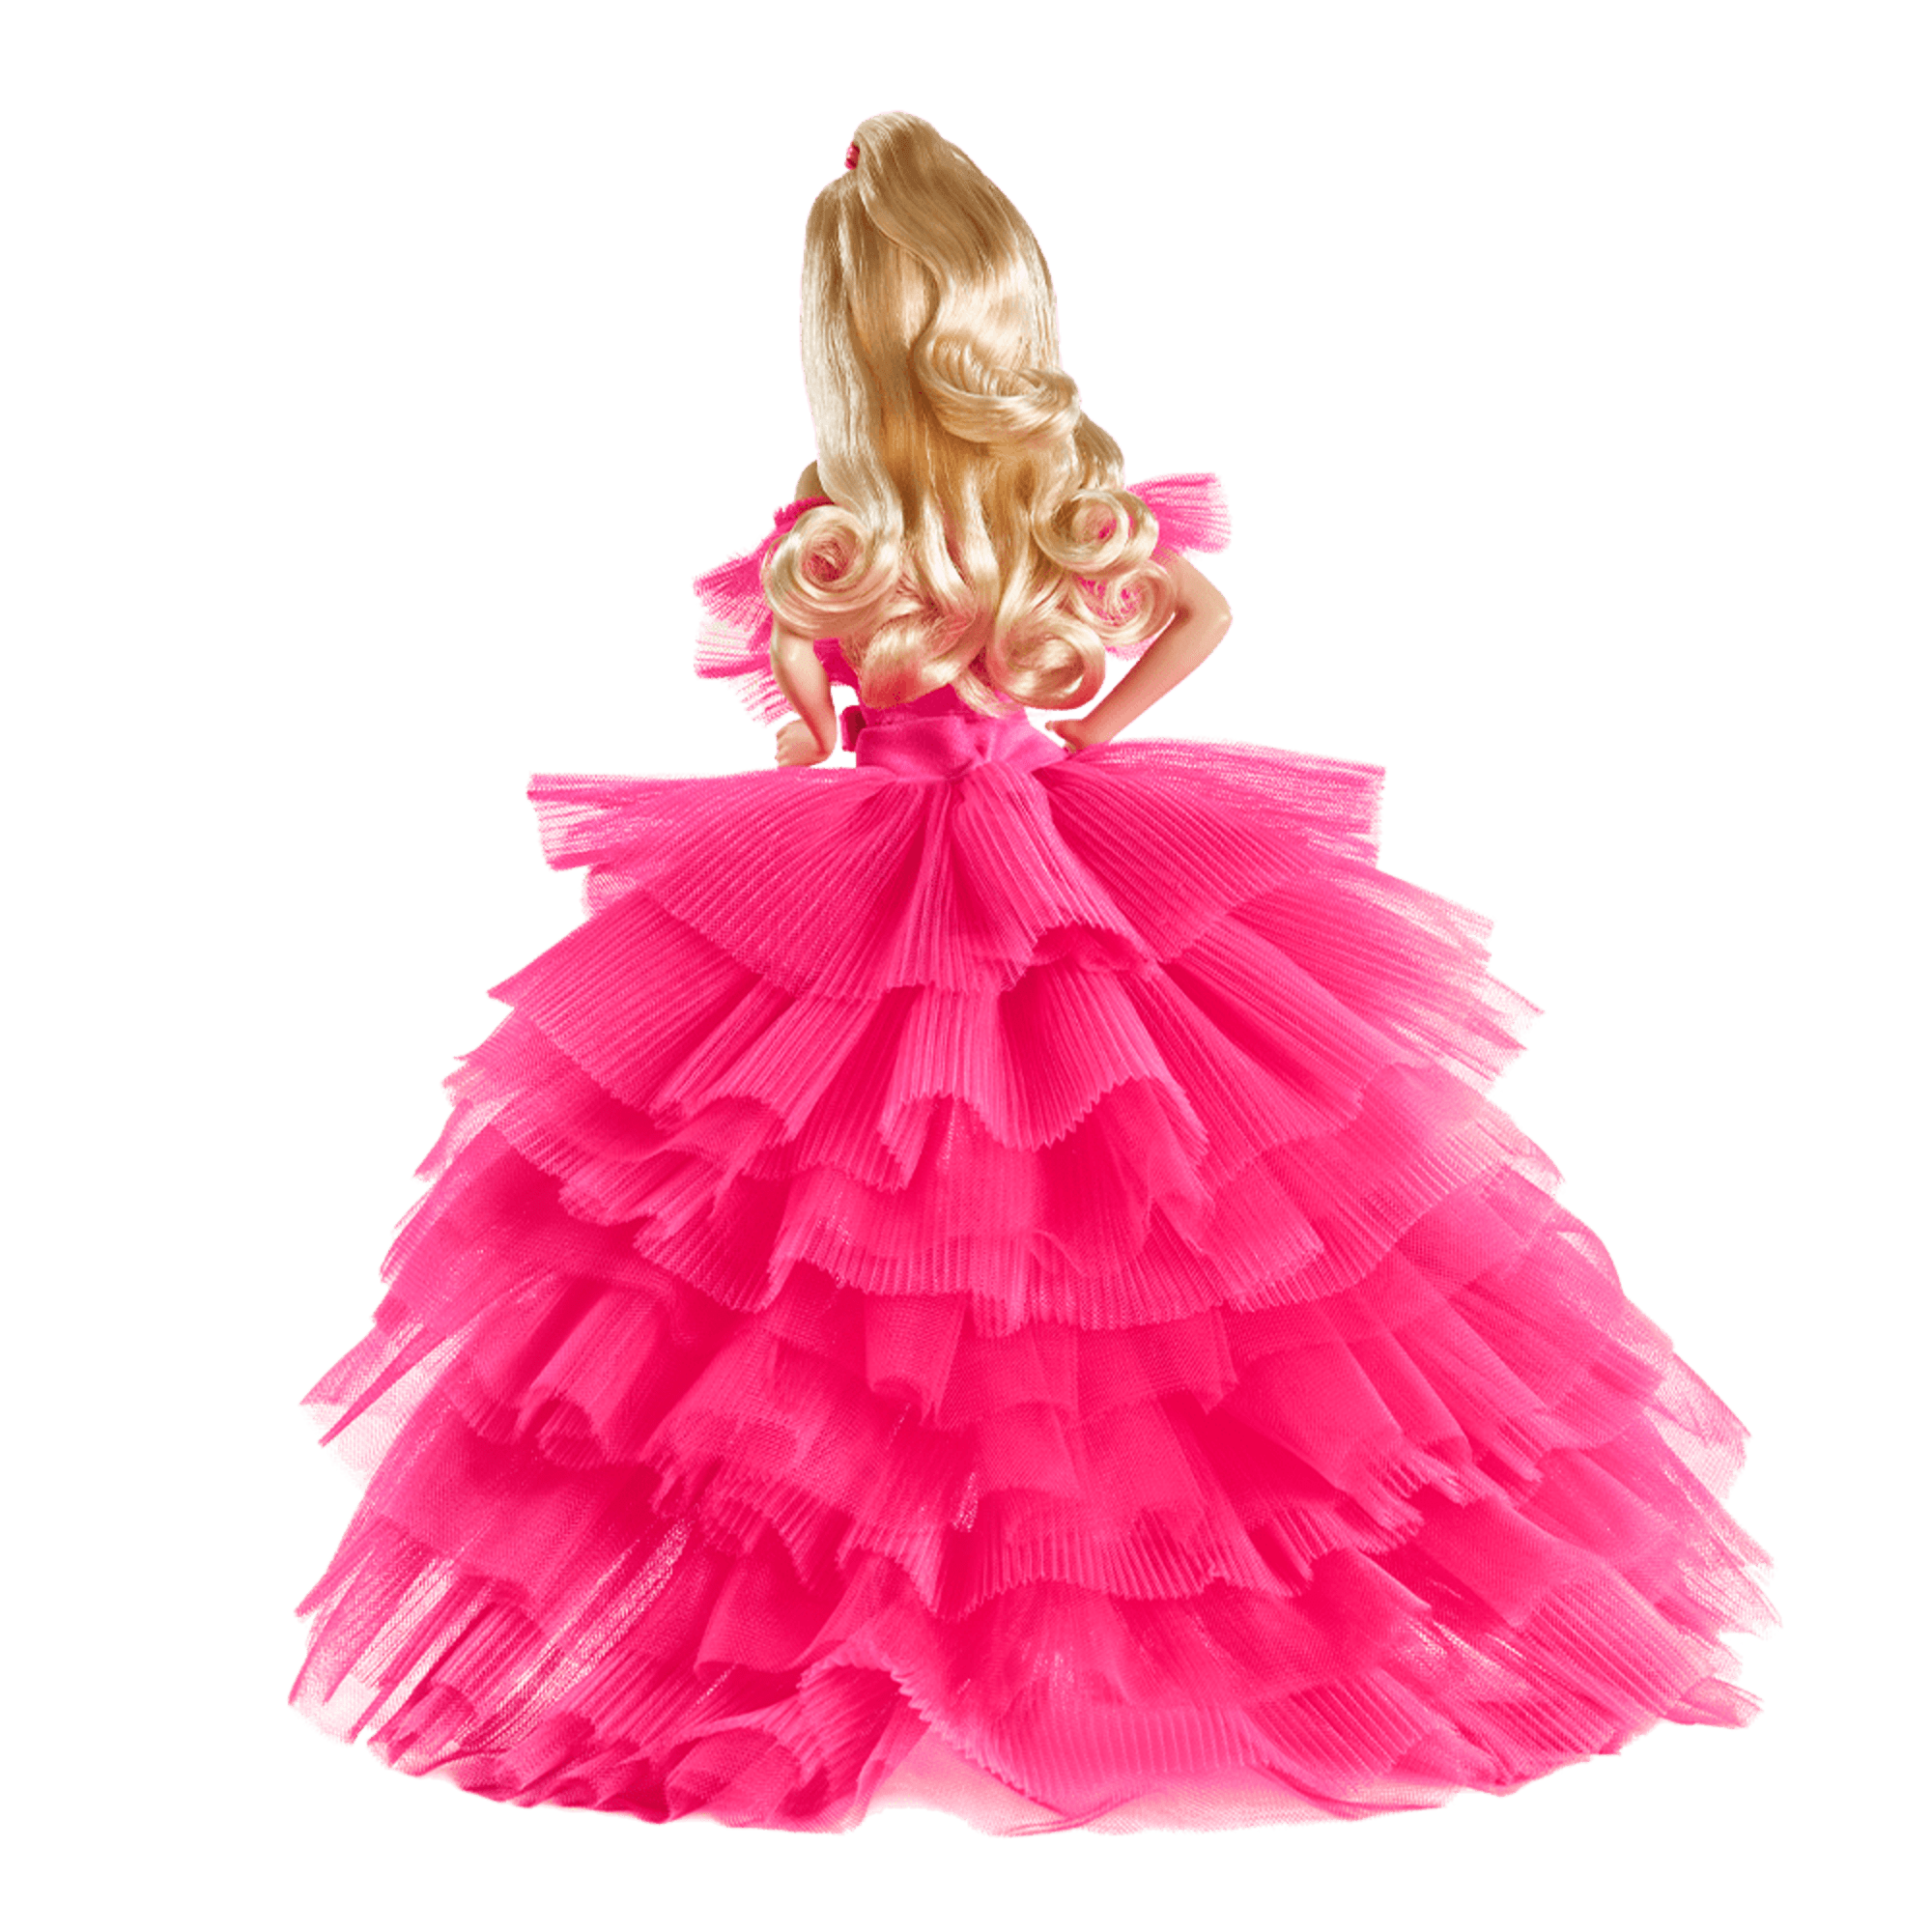 Barbie Pink Collection Doll Pink Premiere Mattel Creations